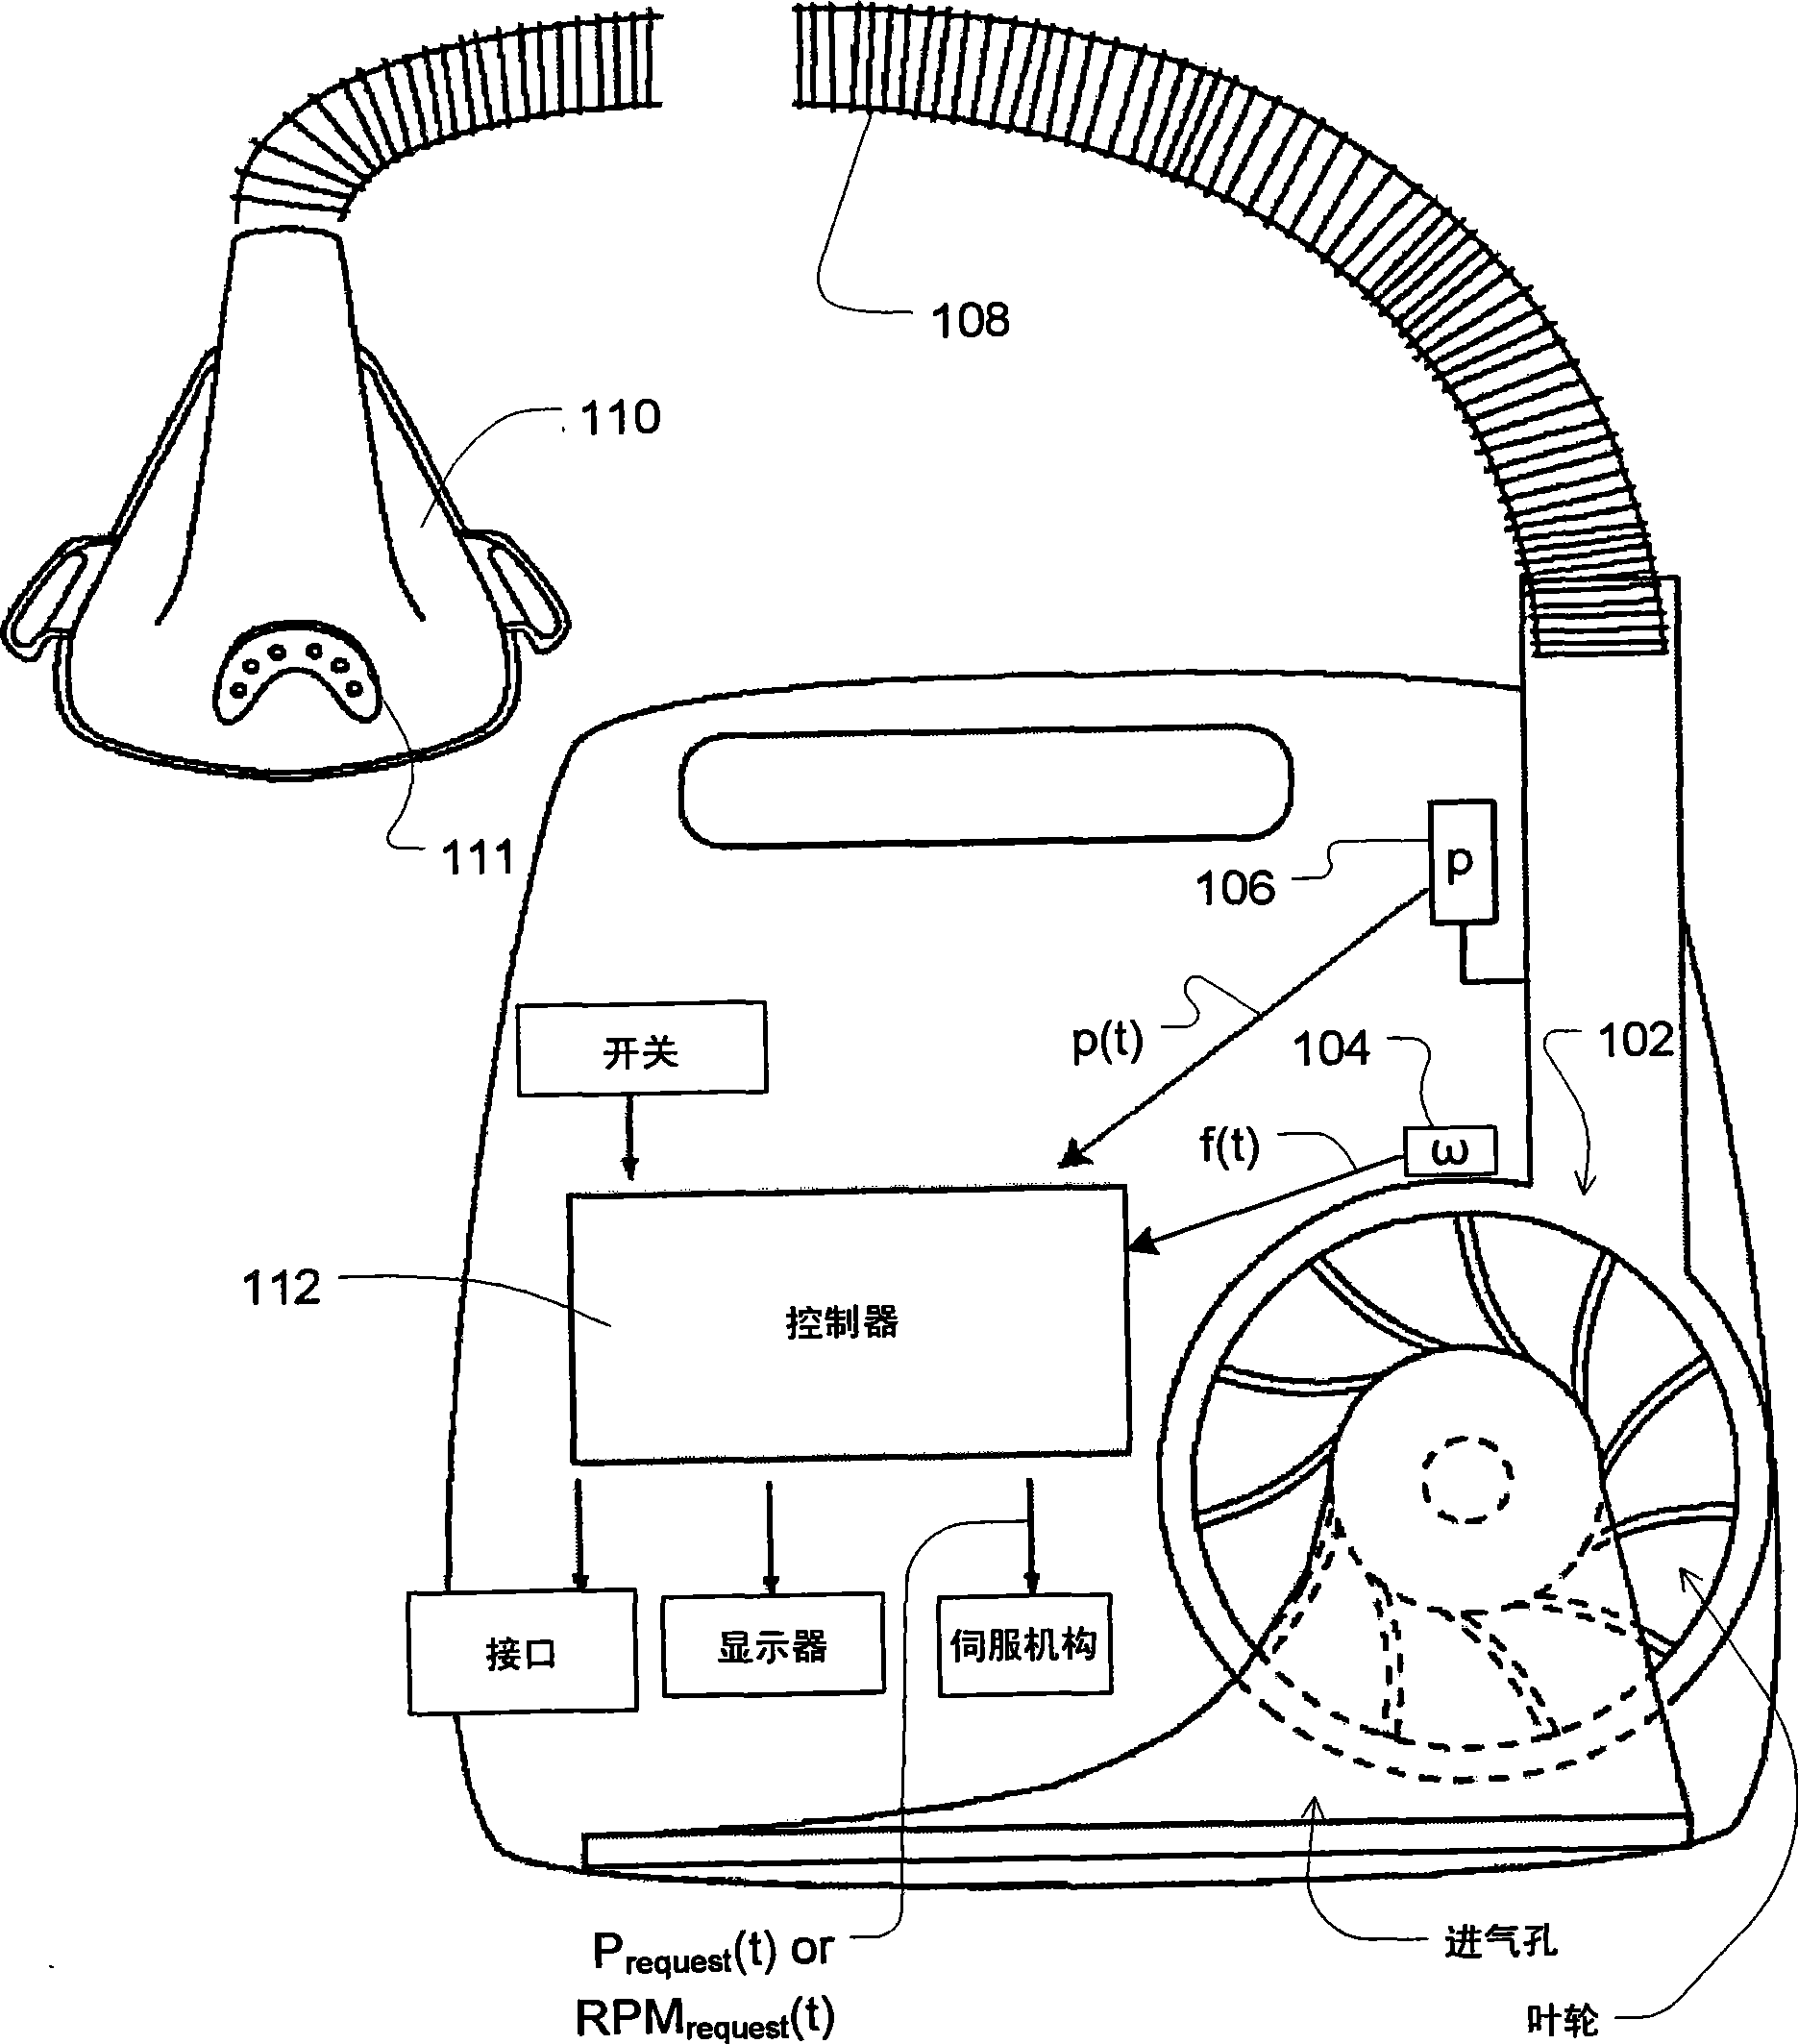 Methods and apparatus for pressure therapy in the treatment of sleep disordered breathing